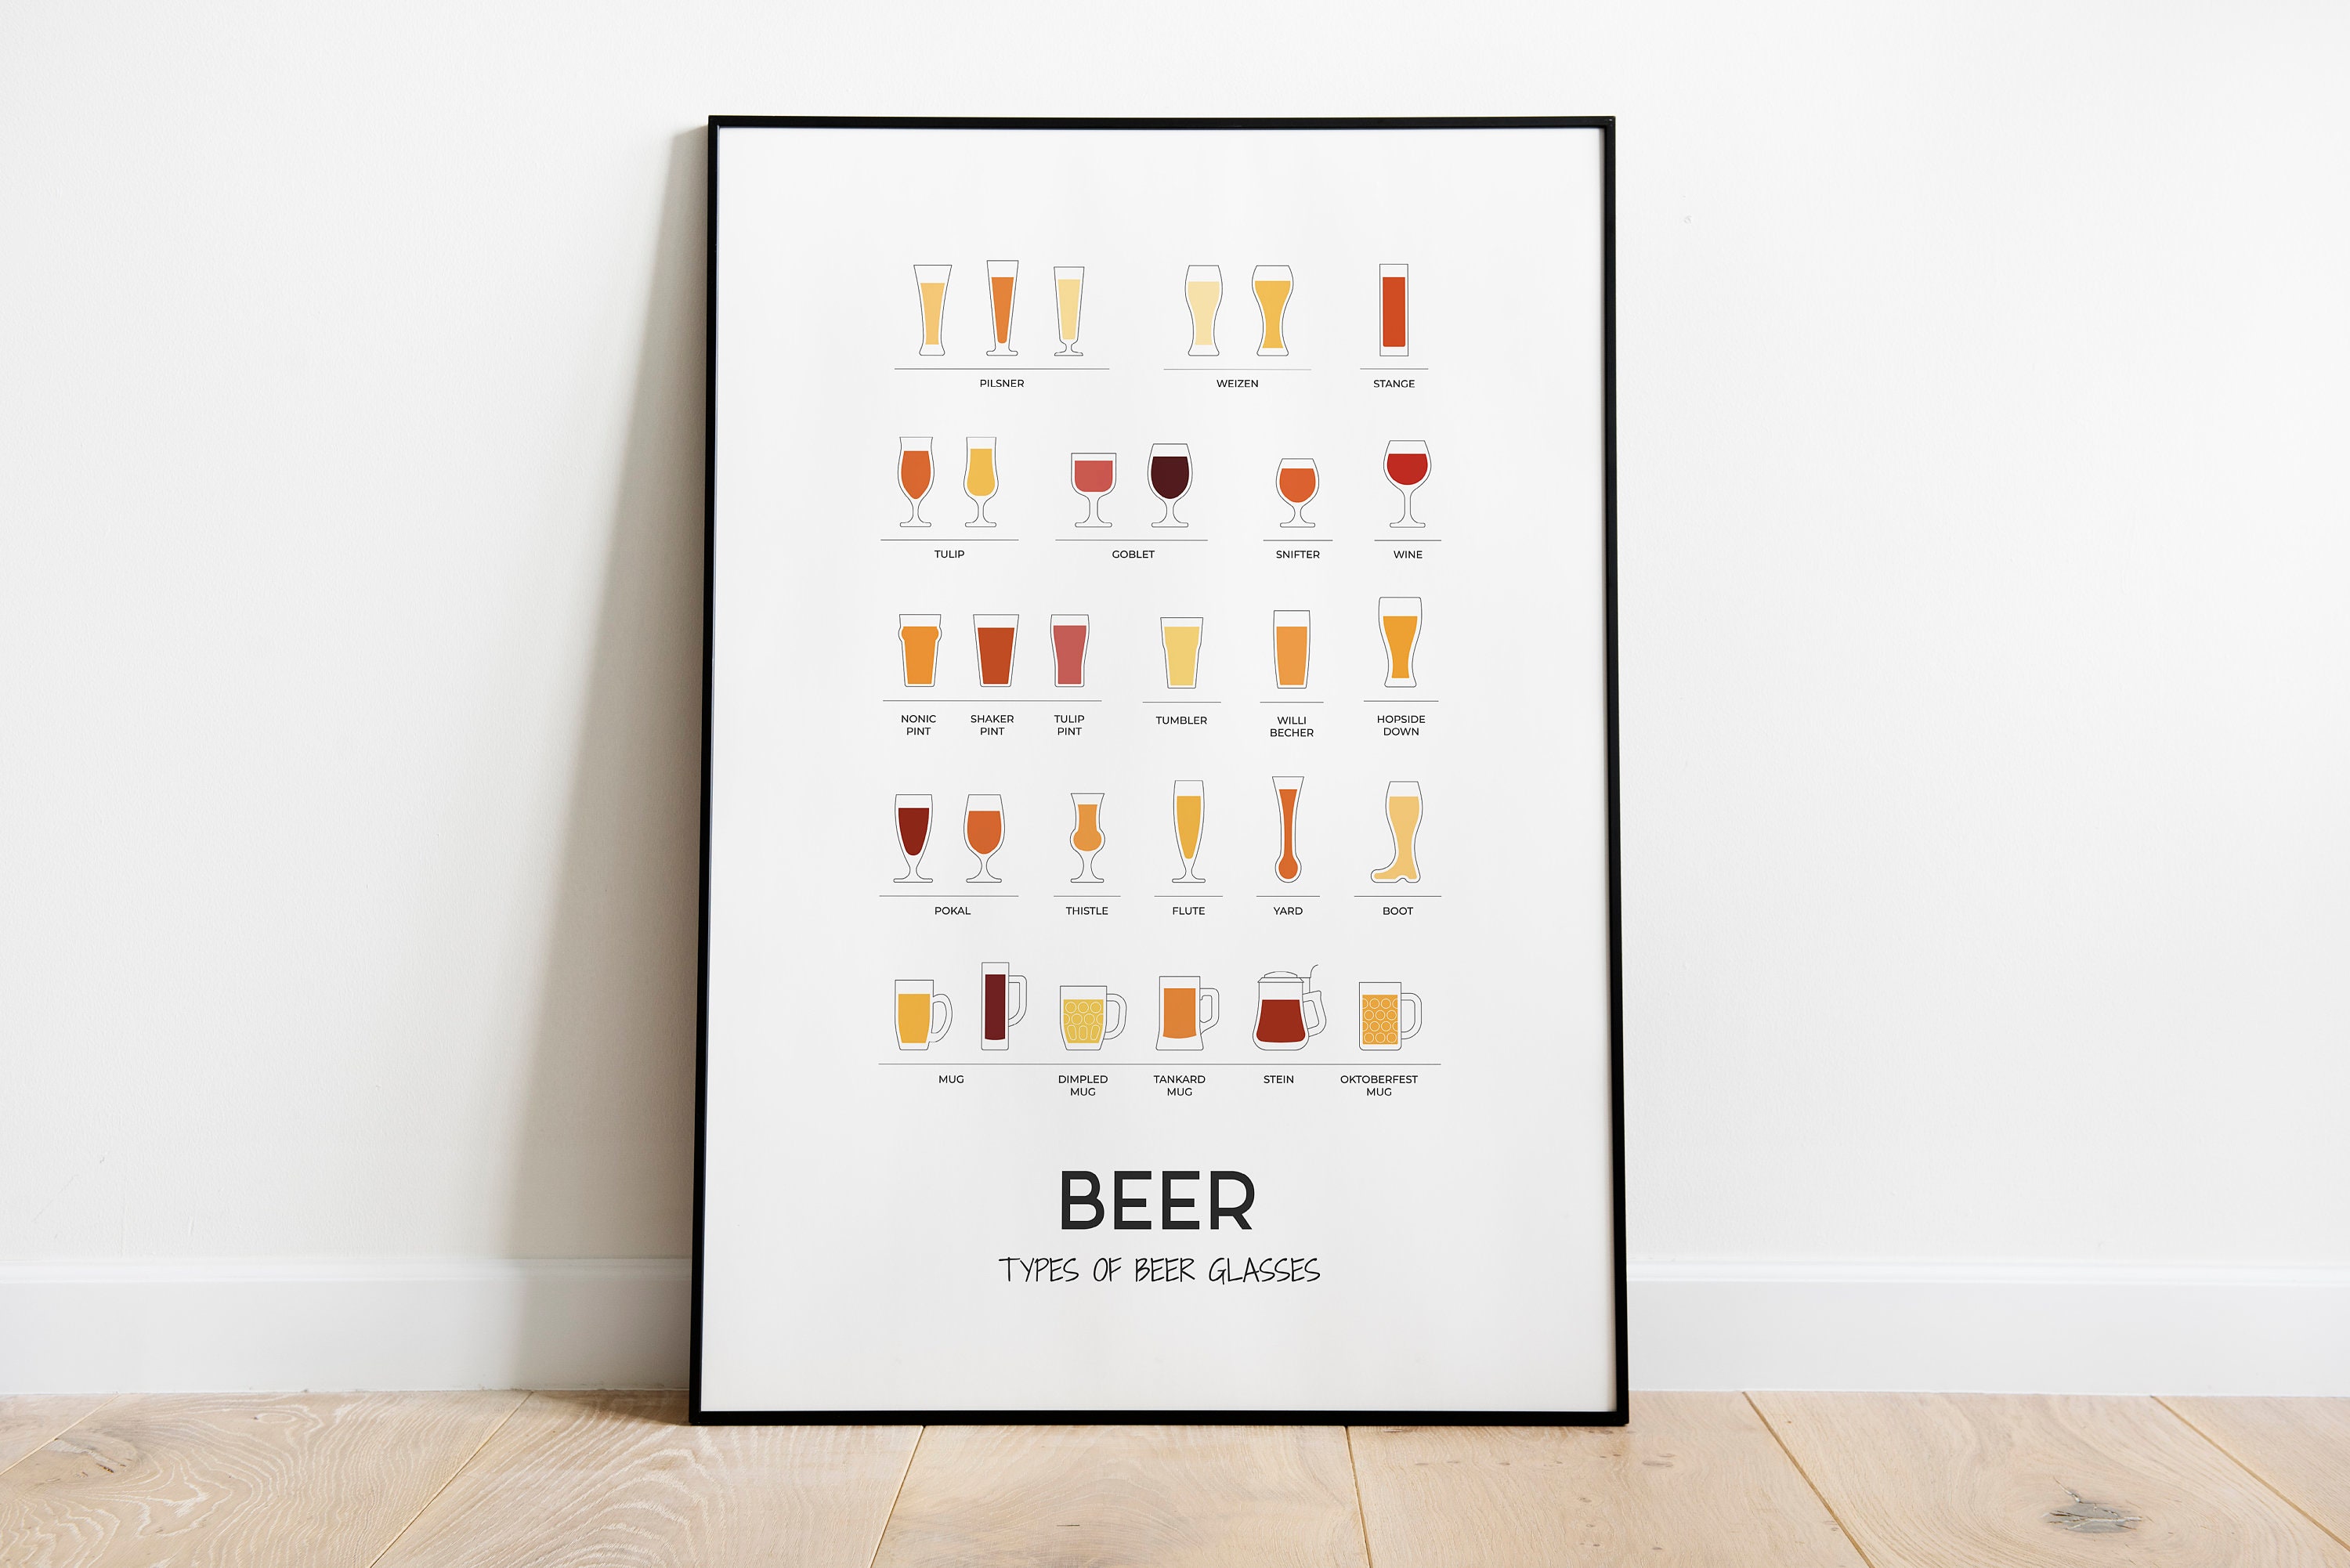 Types Of Beer Glasses And Styles Of Beer Reference Guide Chart Home Bar  Decor Pub Decor IPA Beer Mug Pint Glass Beer Sign Porter Stout Ale Beer  Stein